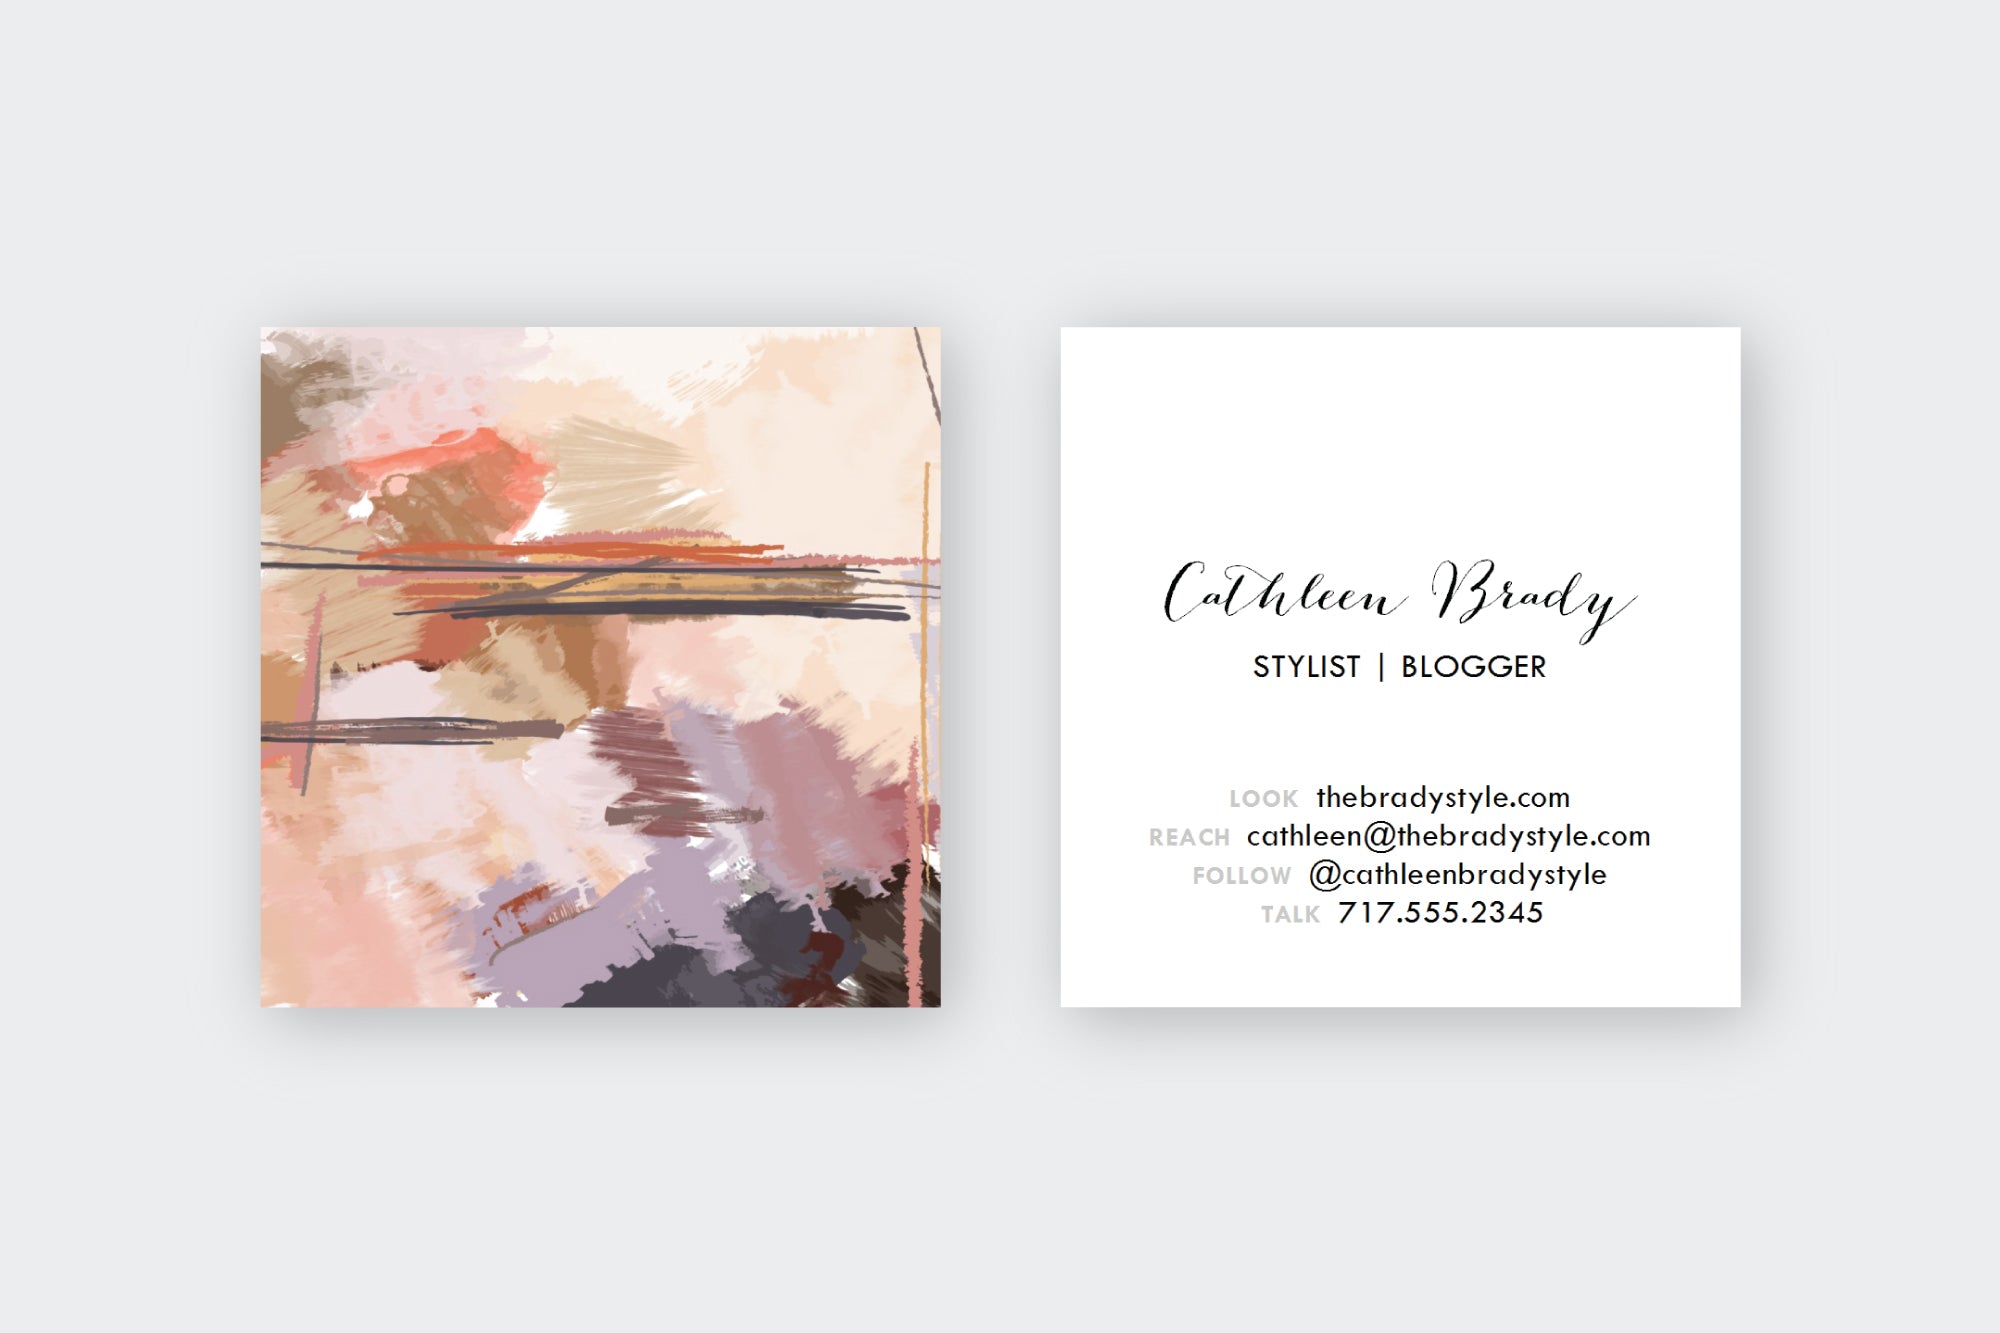 Muted Desert II Abstract Calling Cards